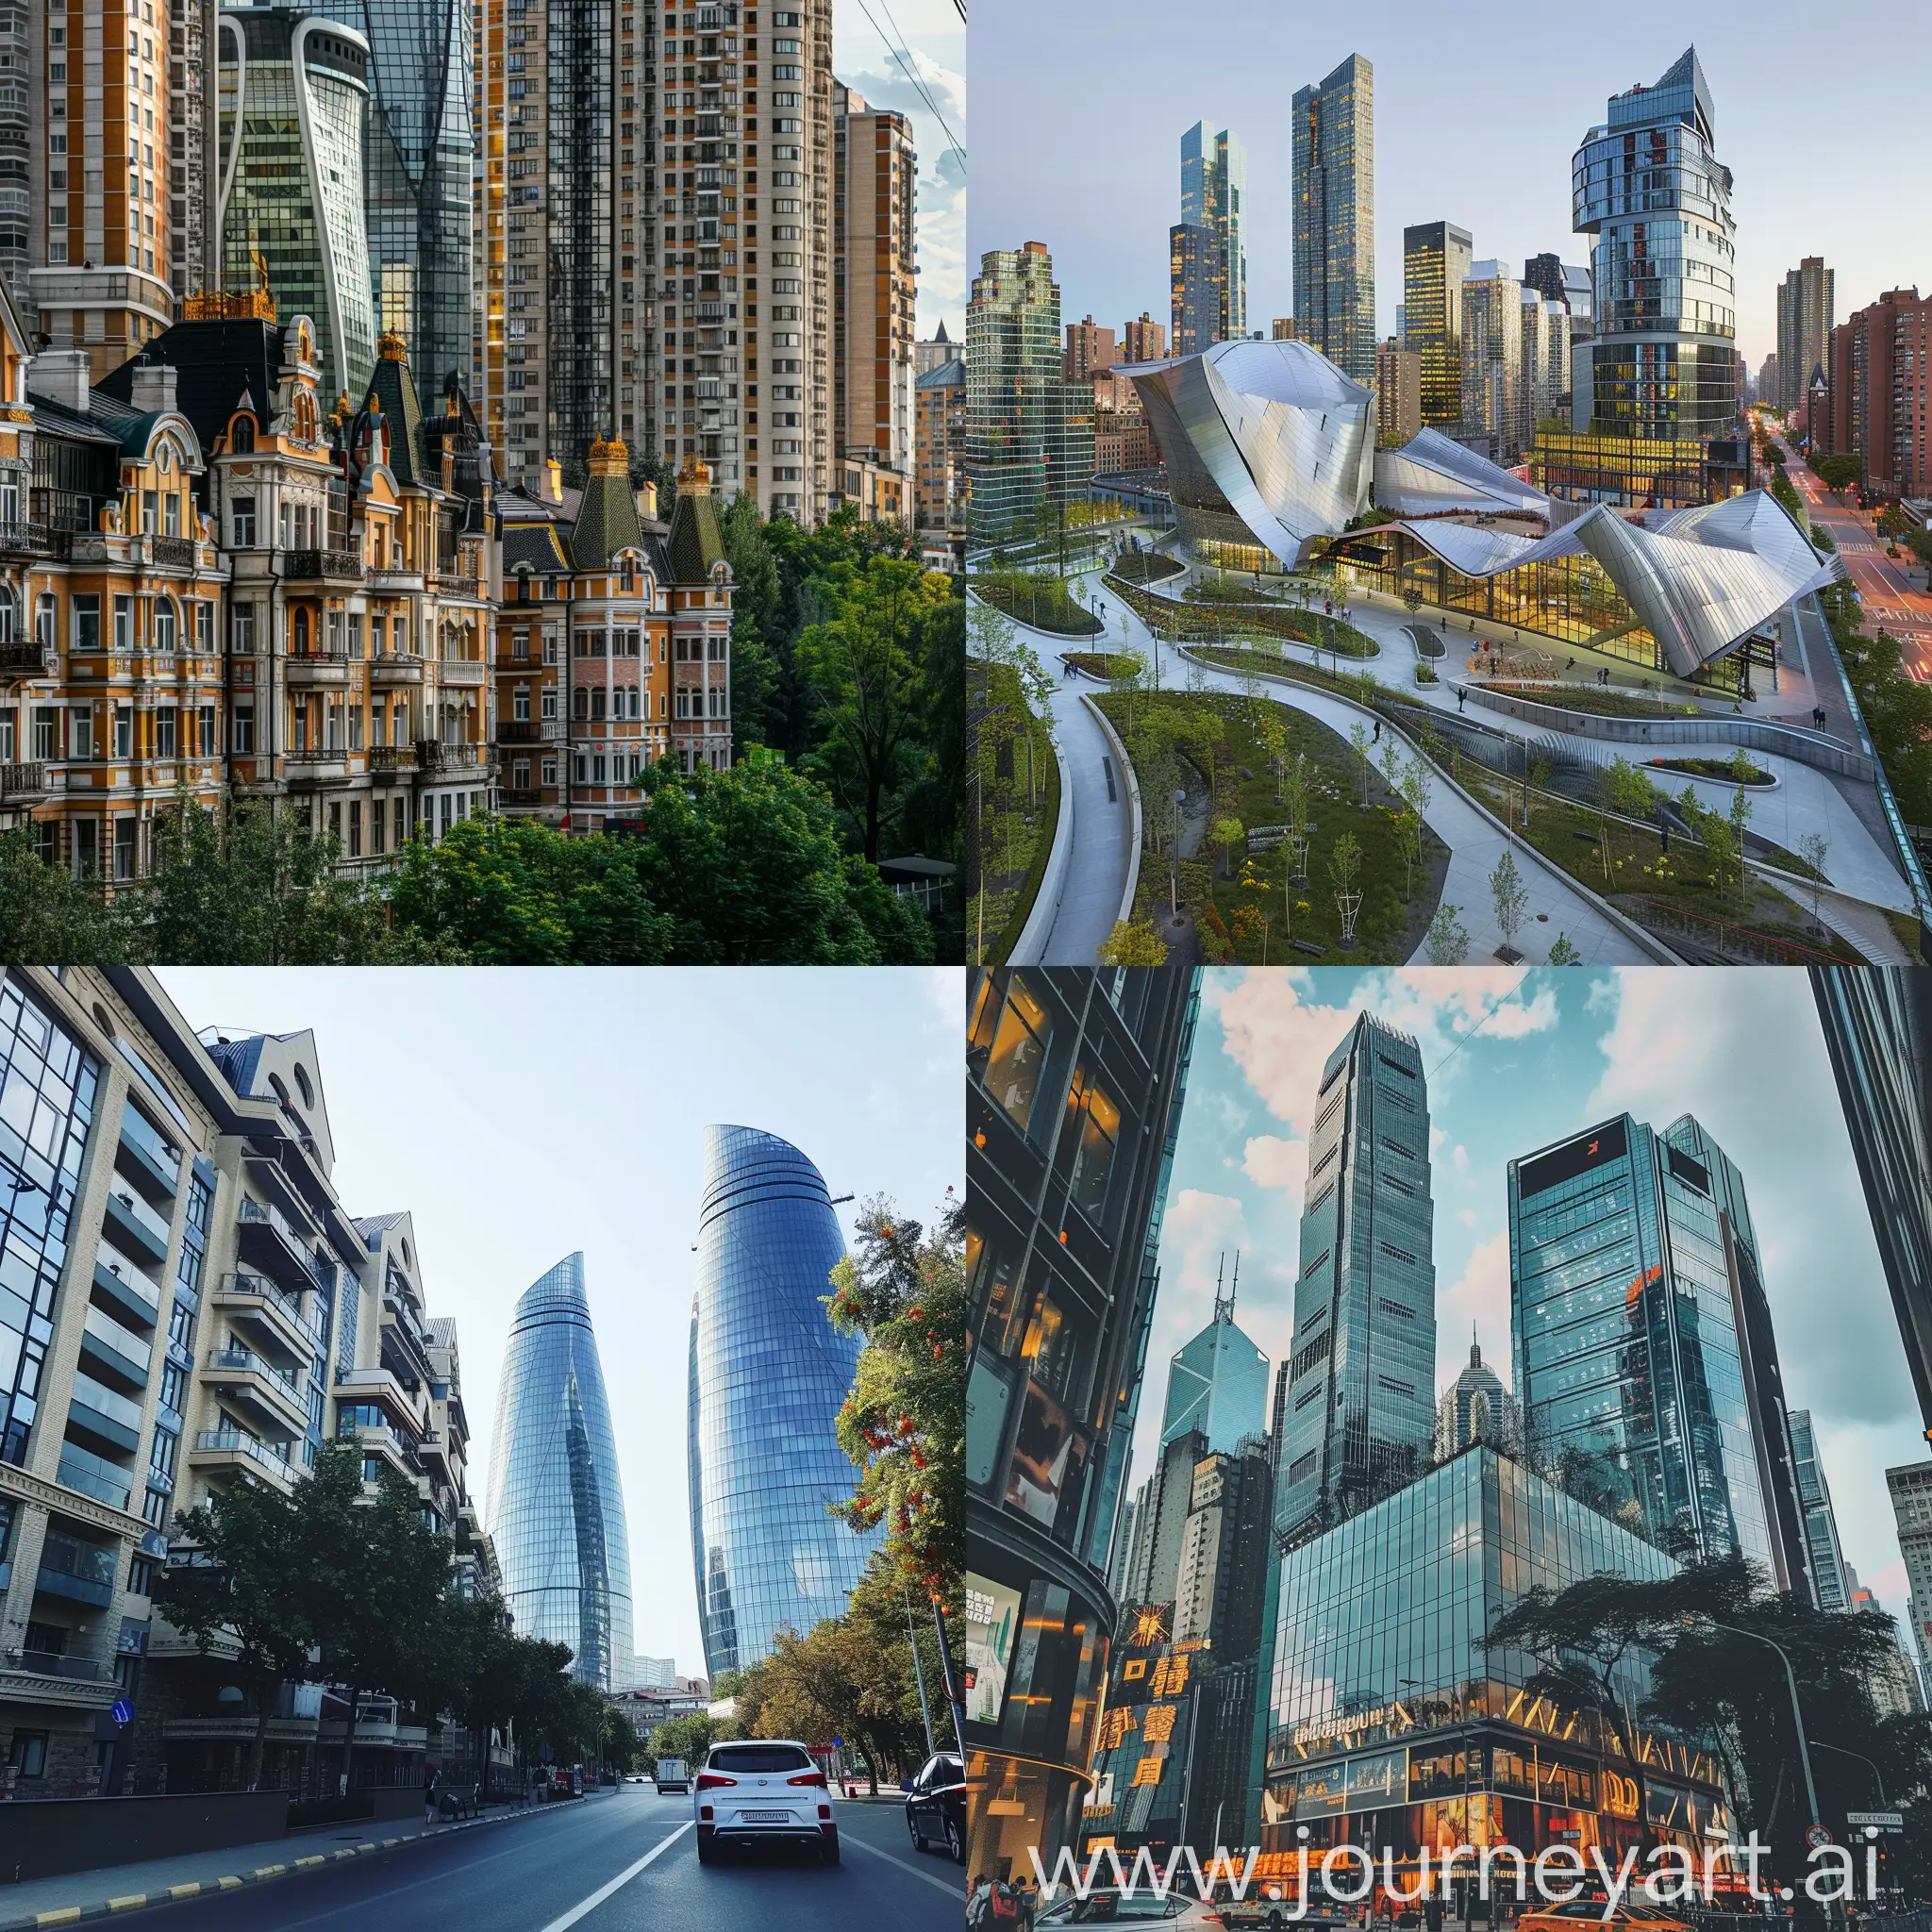 Beautiful city, every building is a unique architectural masterpiece, mix of ultramodern and traditional buildings